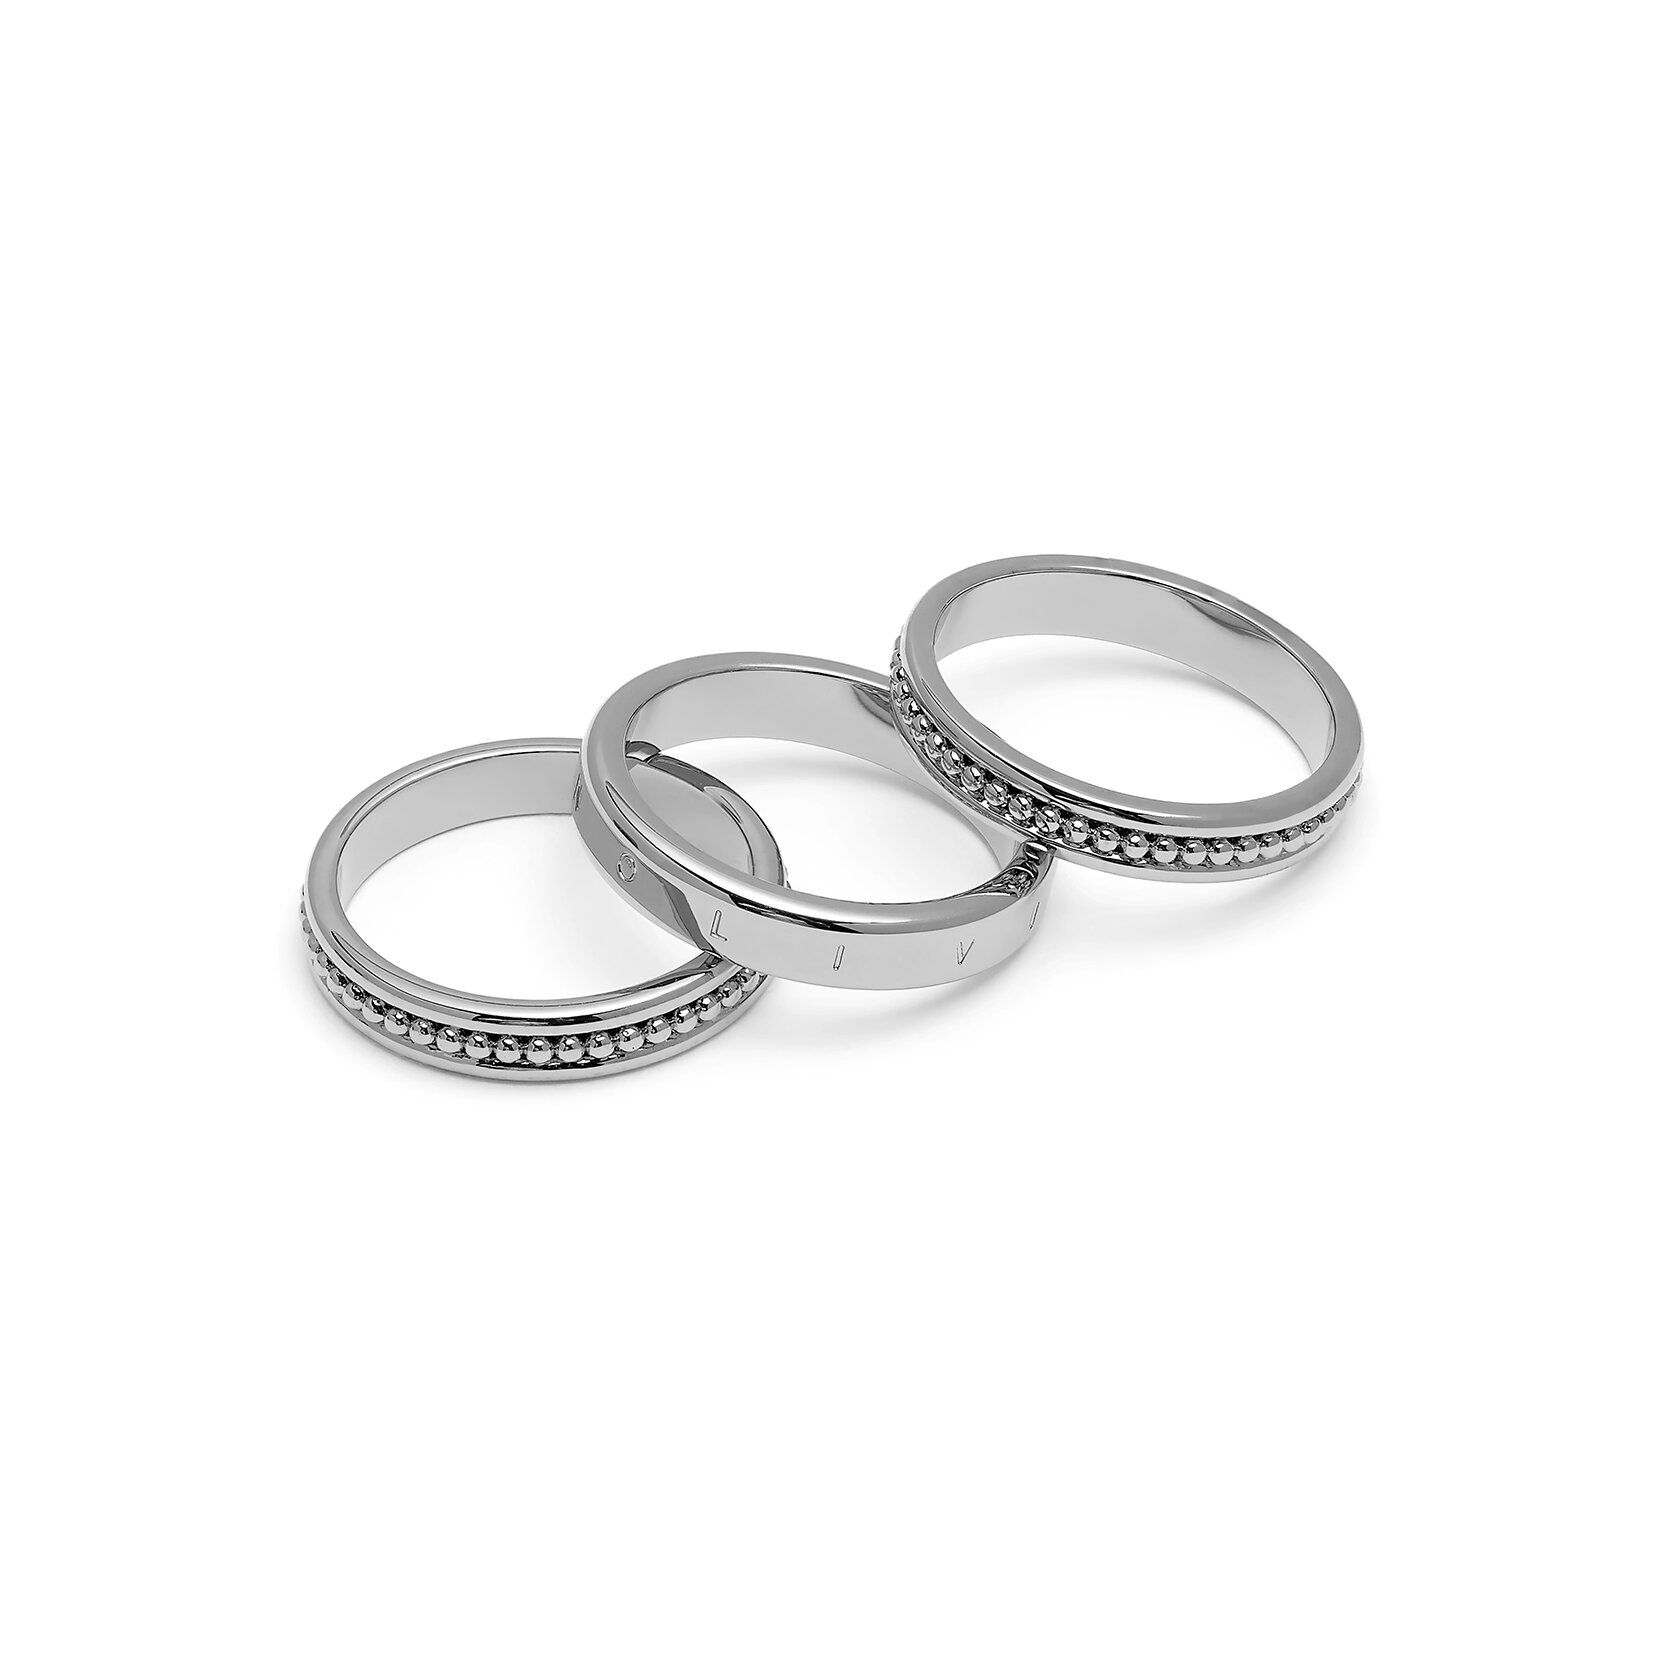 Ever Stacked Silver Tone Rings S